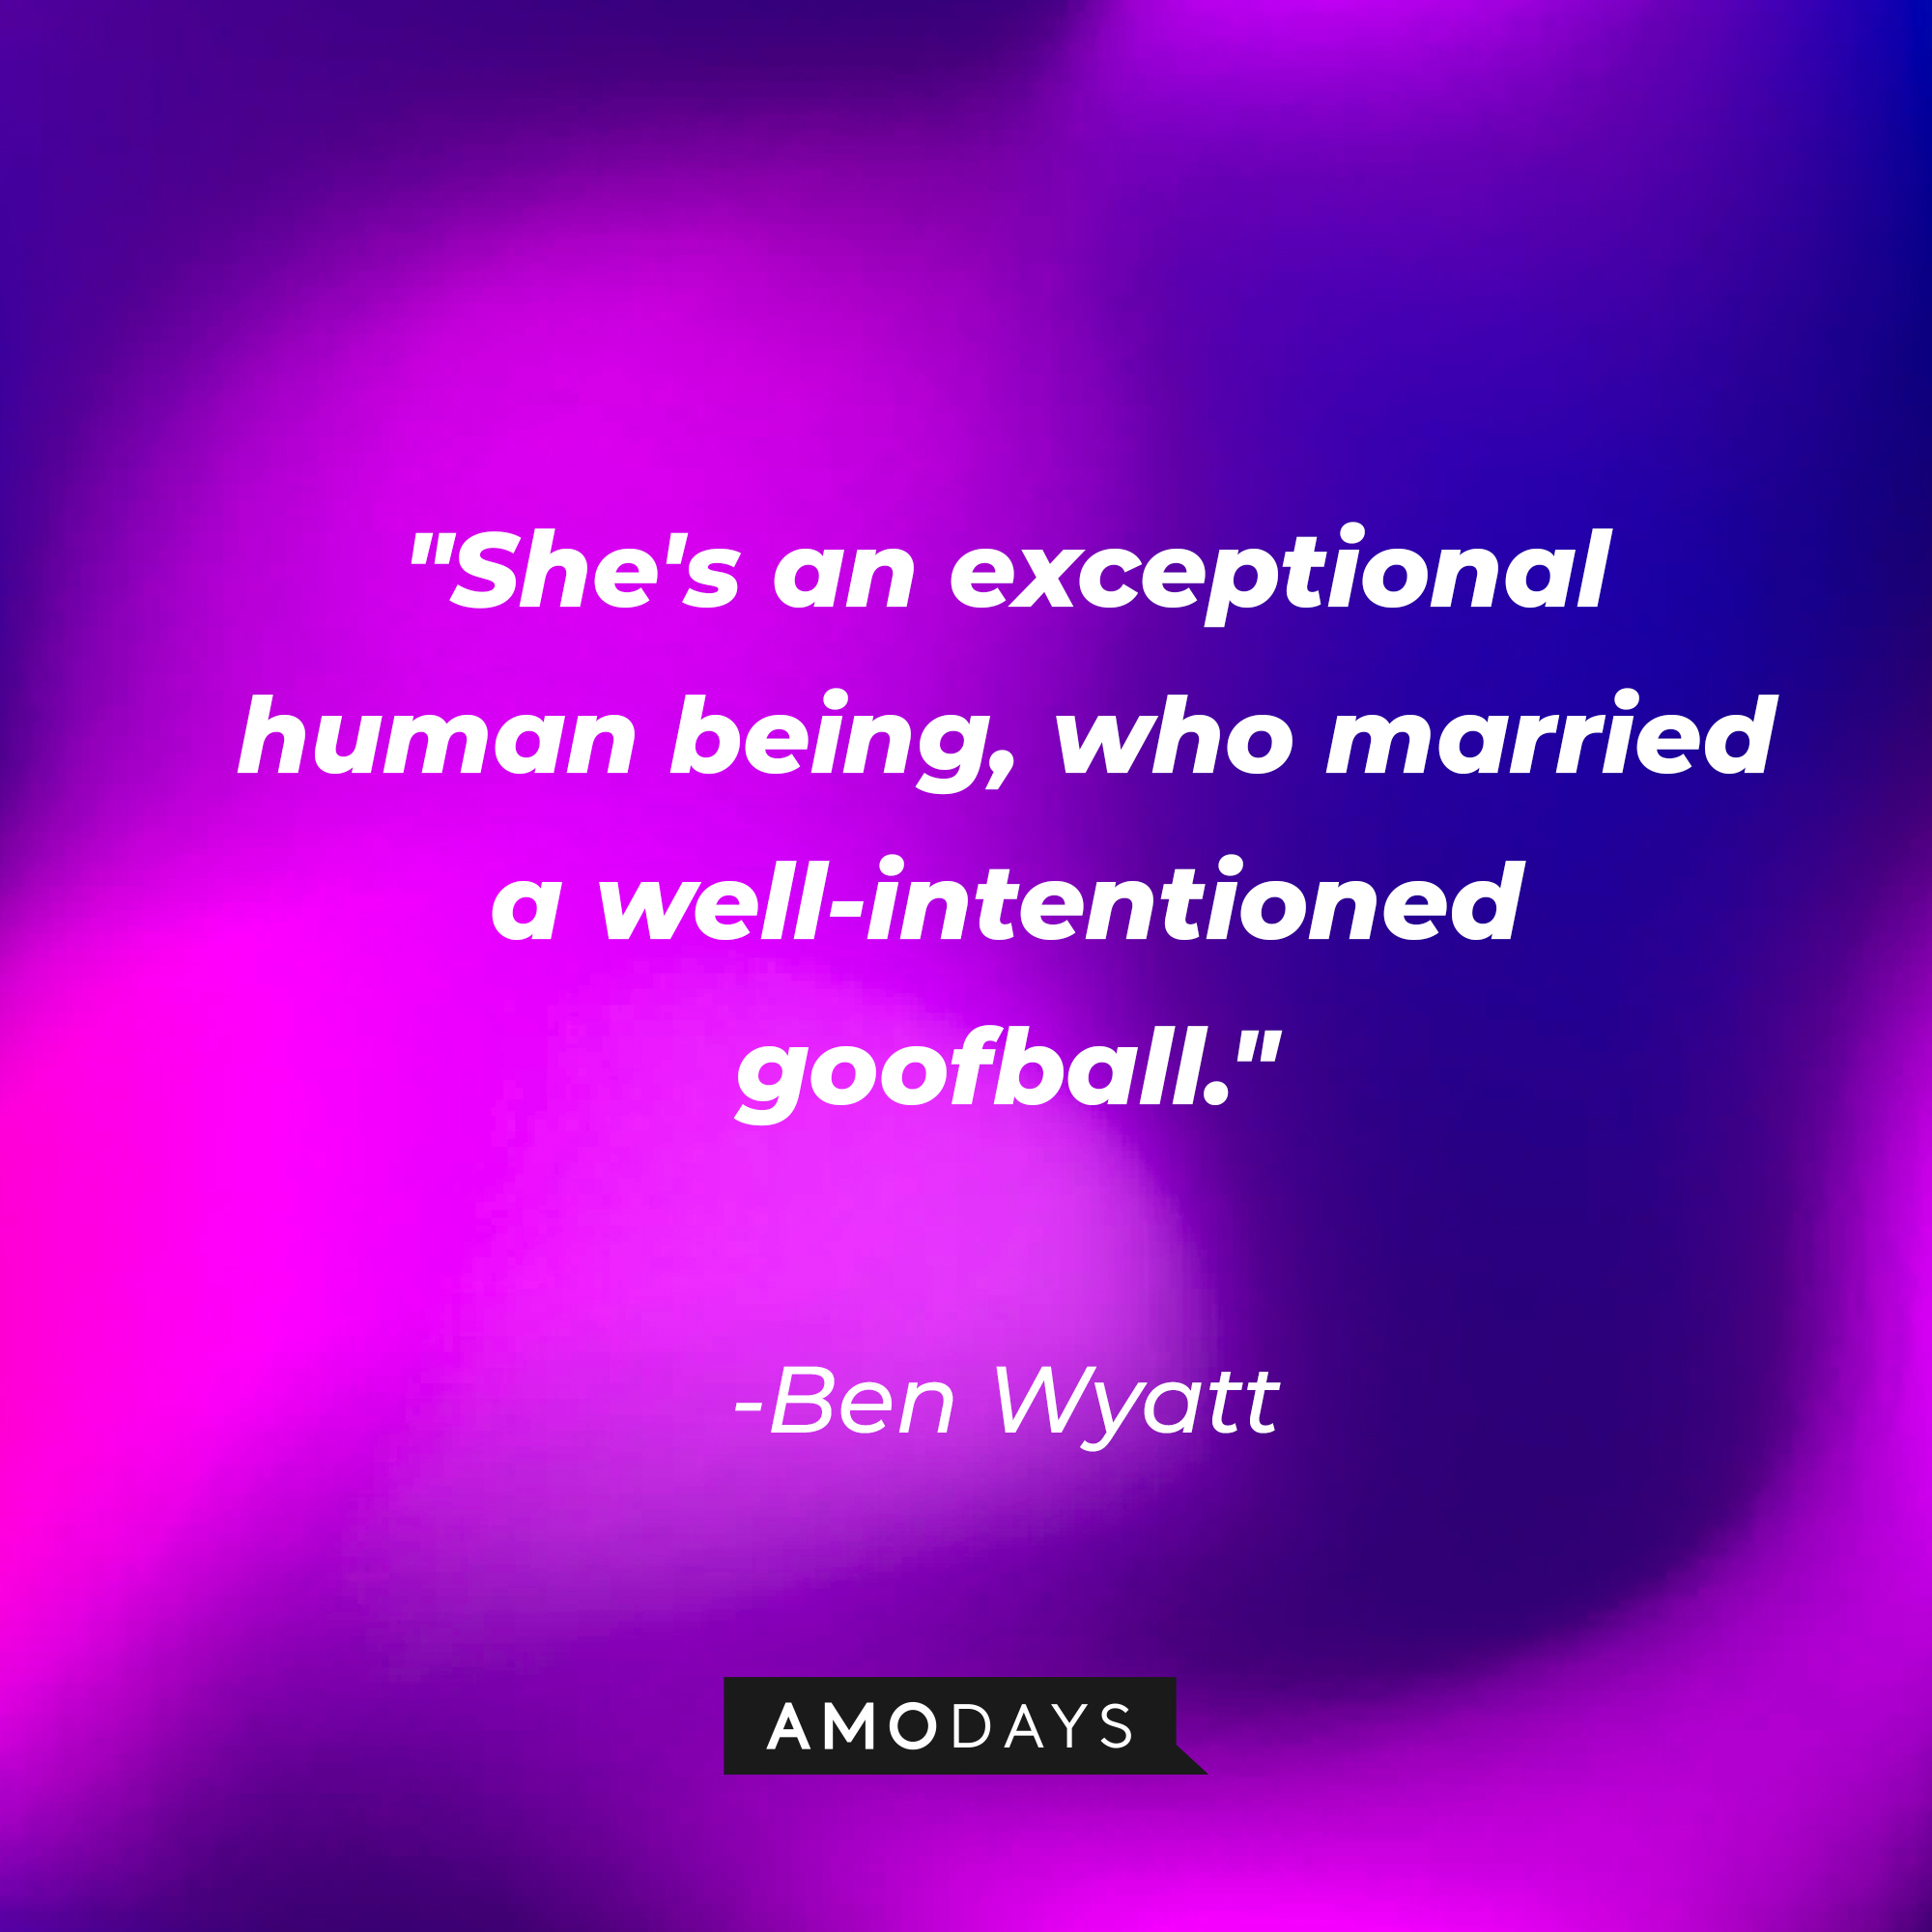 Ben Wyatt's quote: "She's an exceptional human being, who married a well-intentioned goofball." | Source: AmoDays